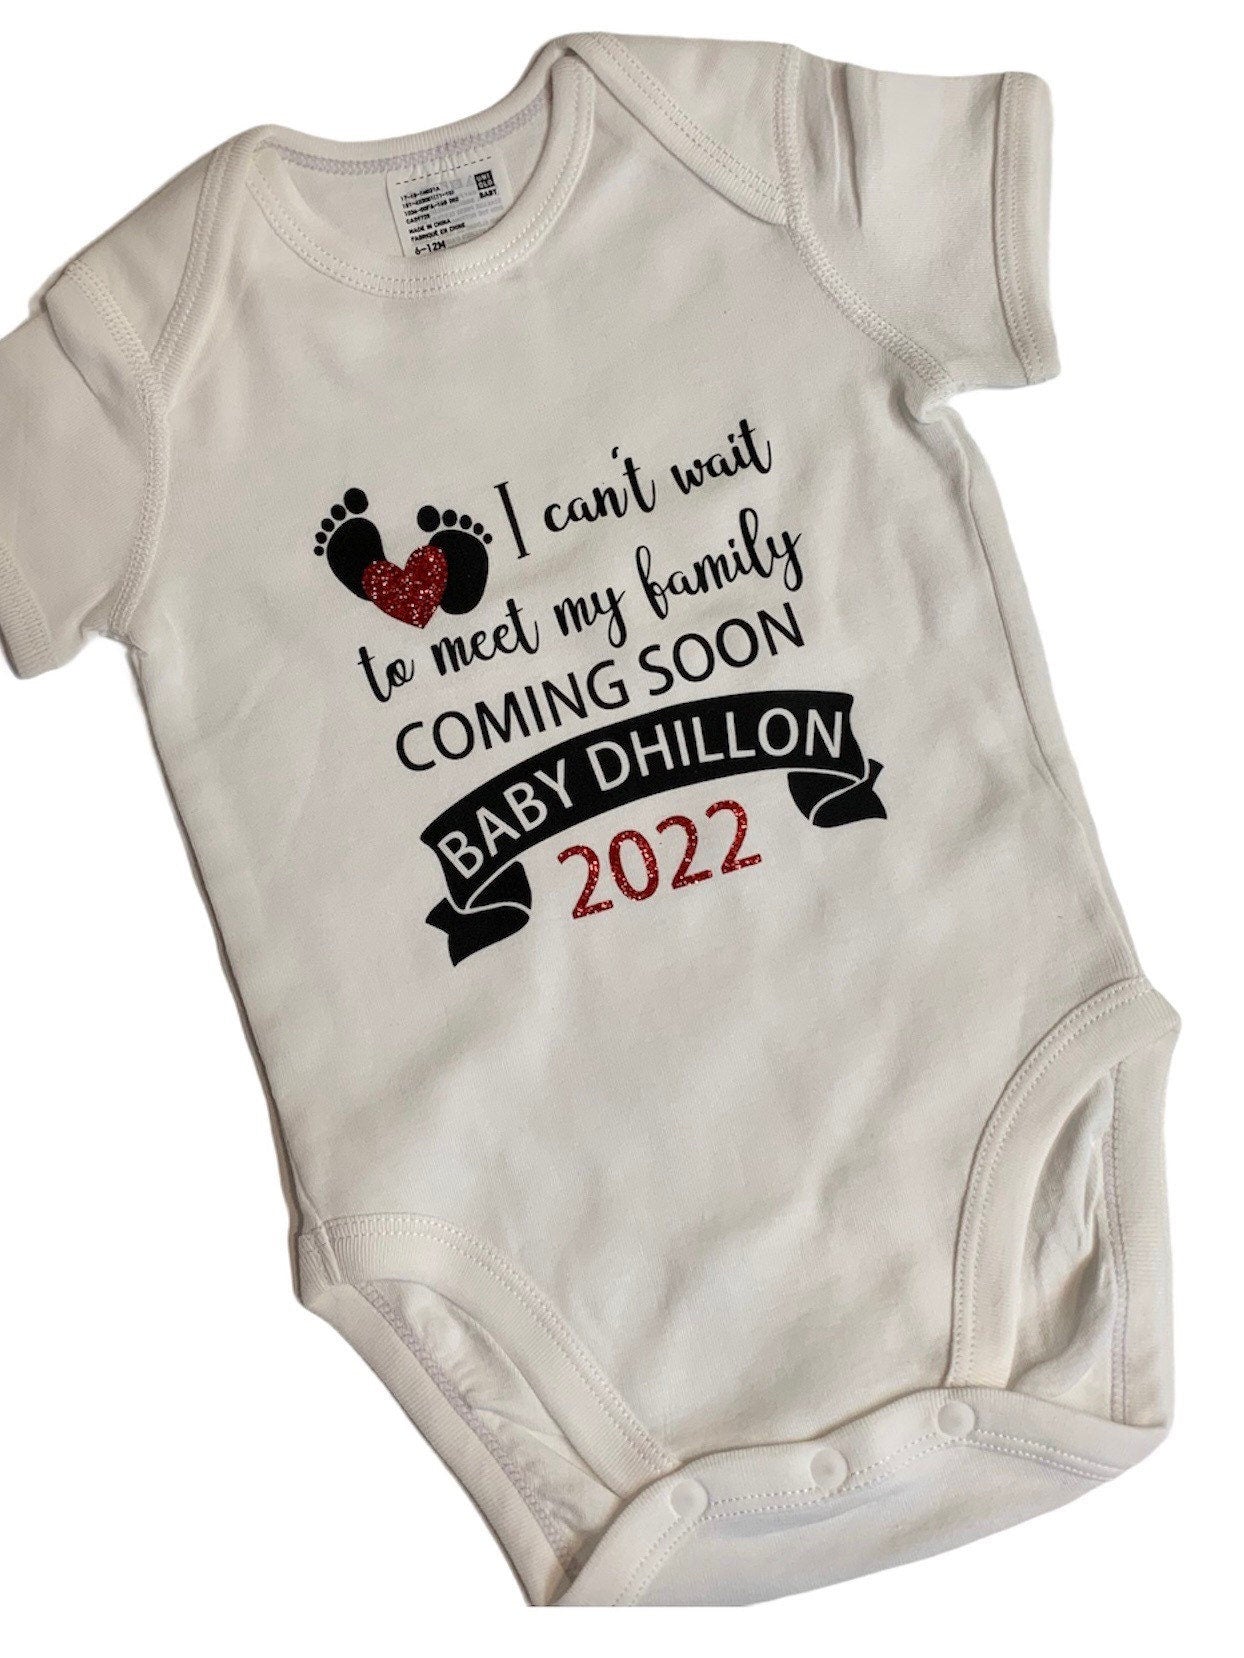 Pandemic Onesie for Baby Shower, My Parents did not practice social distancing Bodysuit Gift ideas